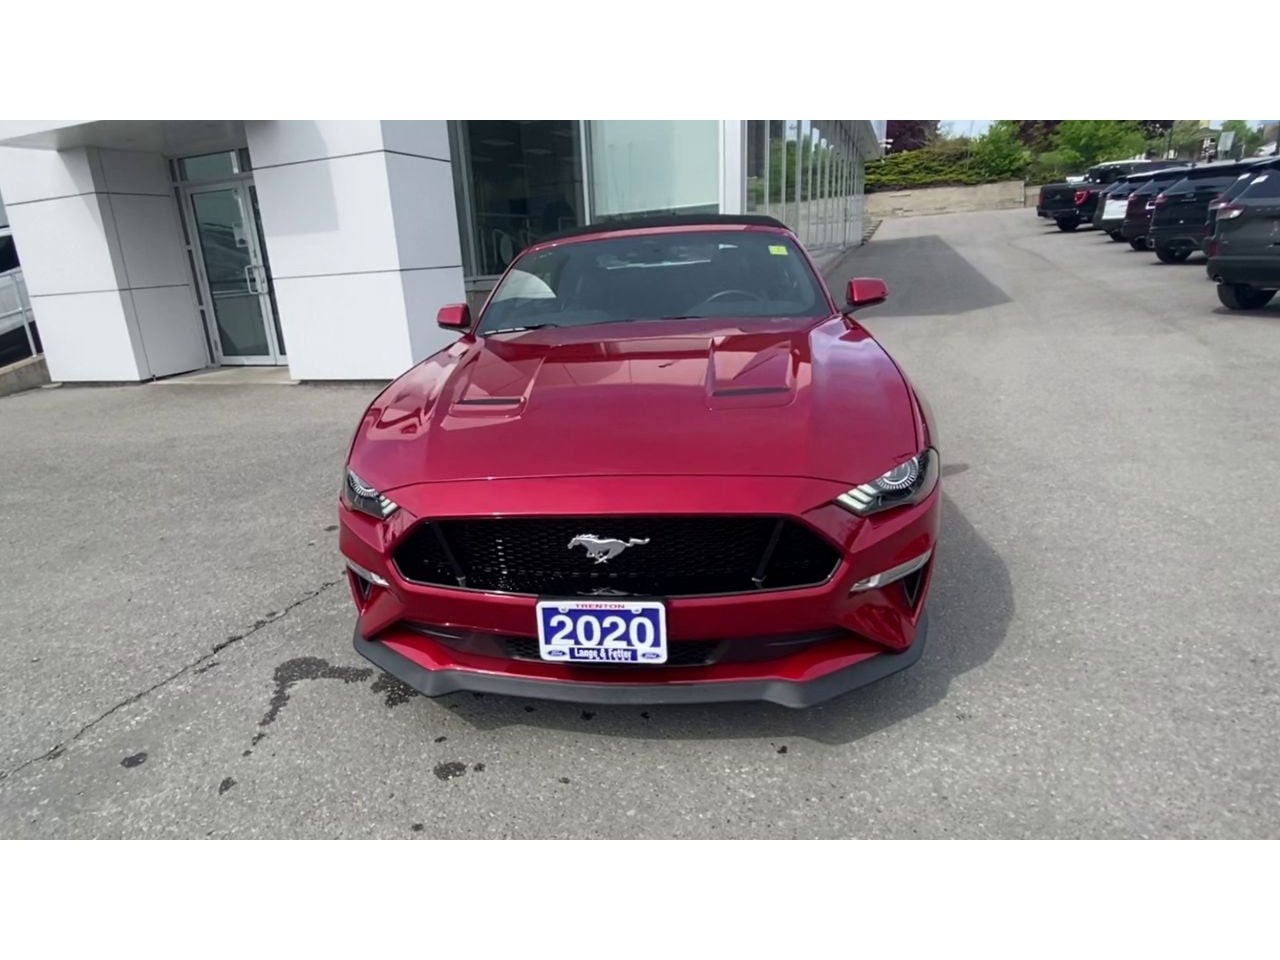 2020 Ford Mustang - P20422 Full Image 3